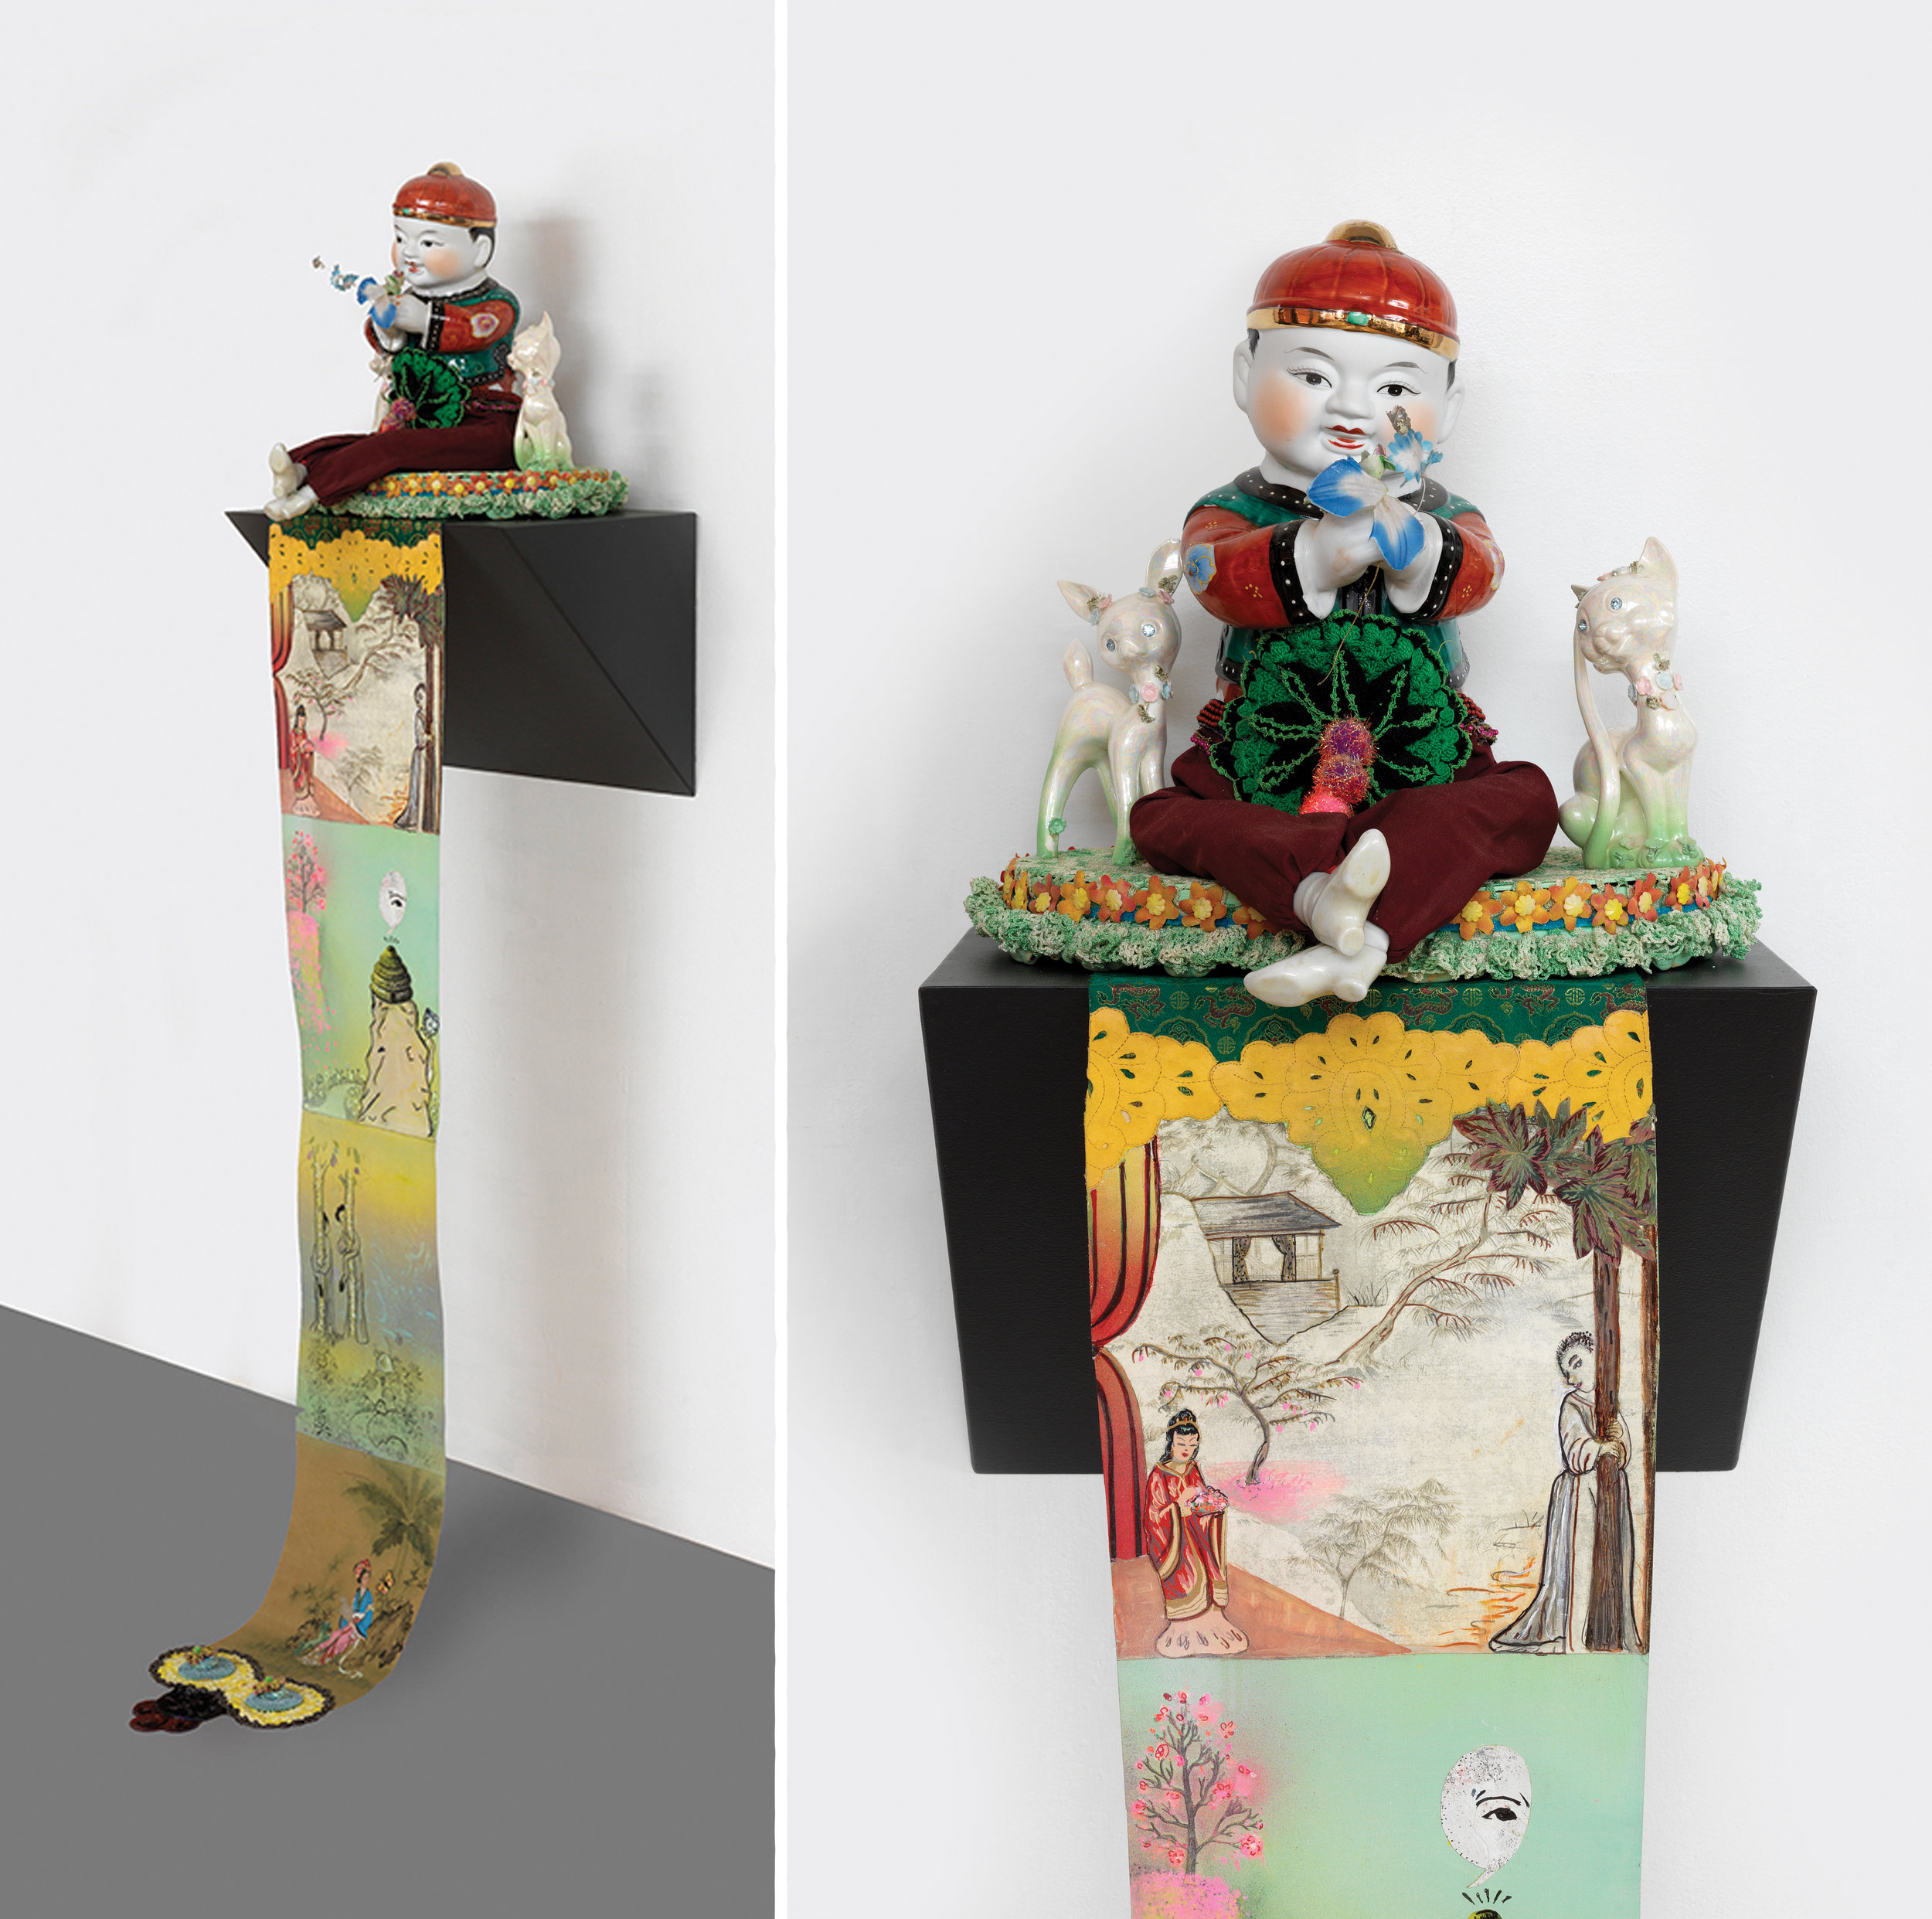 Male-Lovemaking at the end of Springtime, sculpture/objects: 18" × 8" × 18" Scroll: 60" × 10", mixed media, 2006